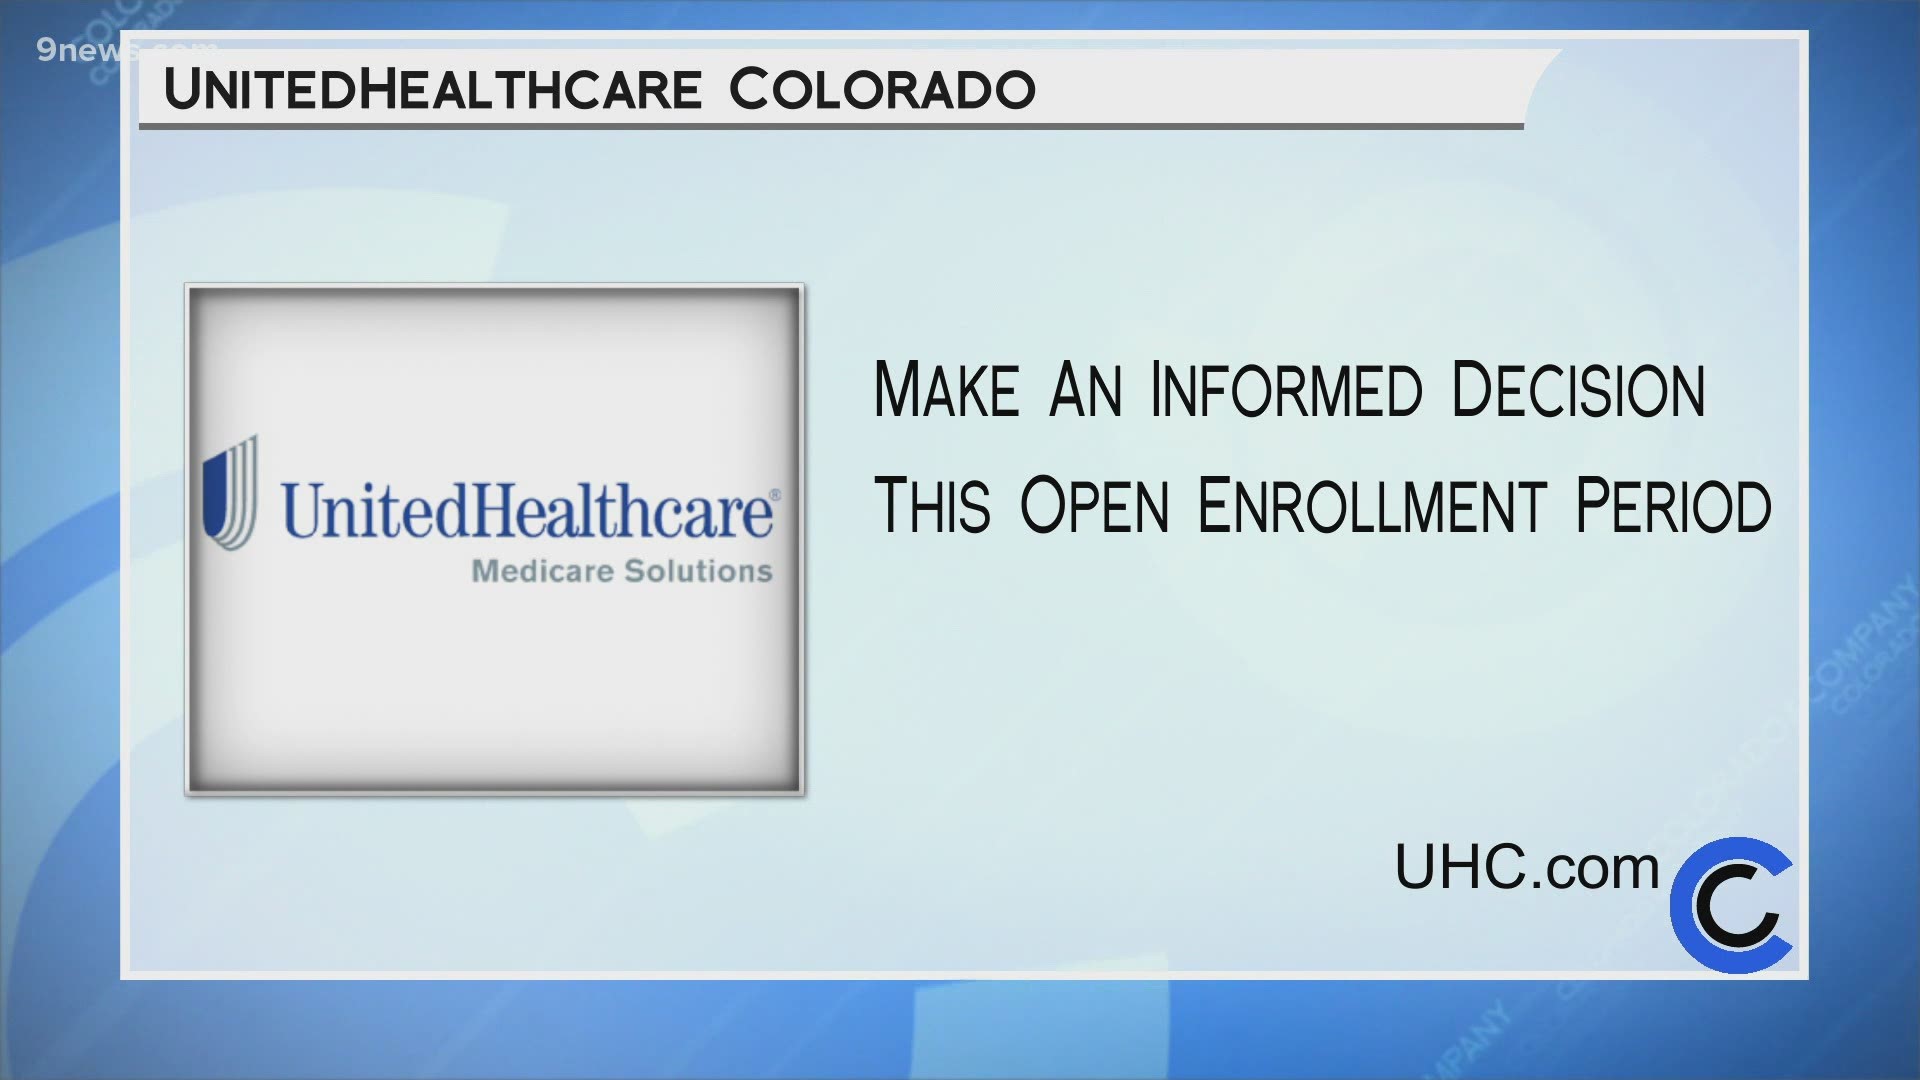 United Healthcare of Colorado wants you to know all your options when it comes to your healthcare. Learn more at UHC.com.